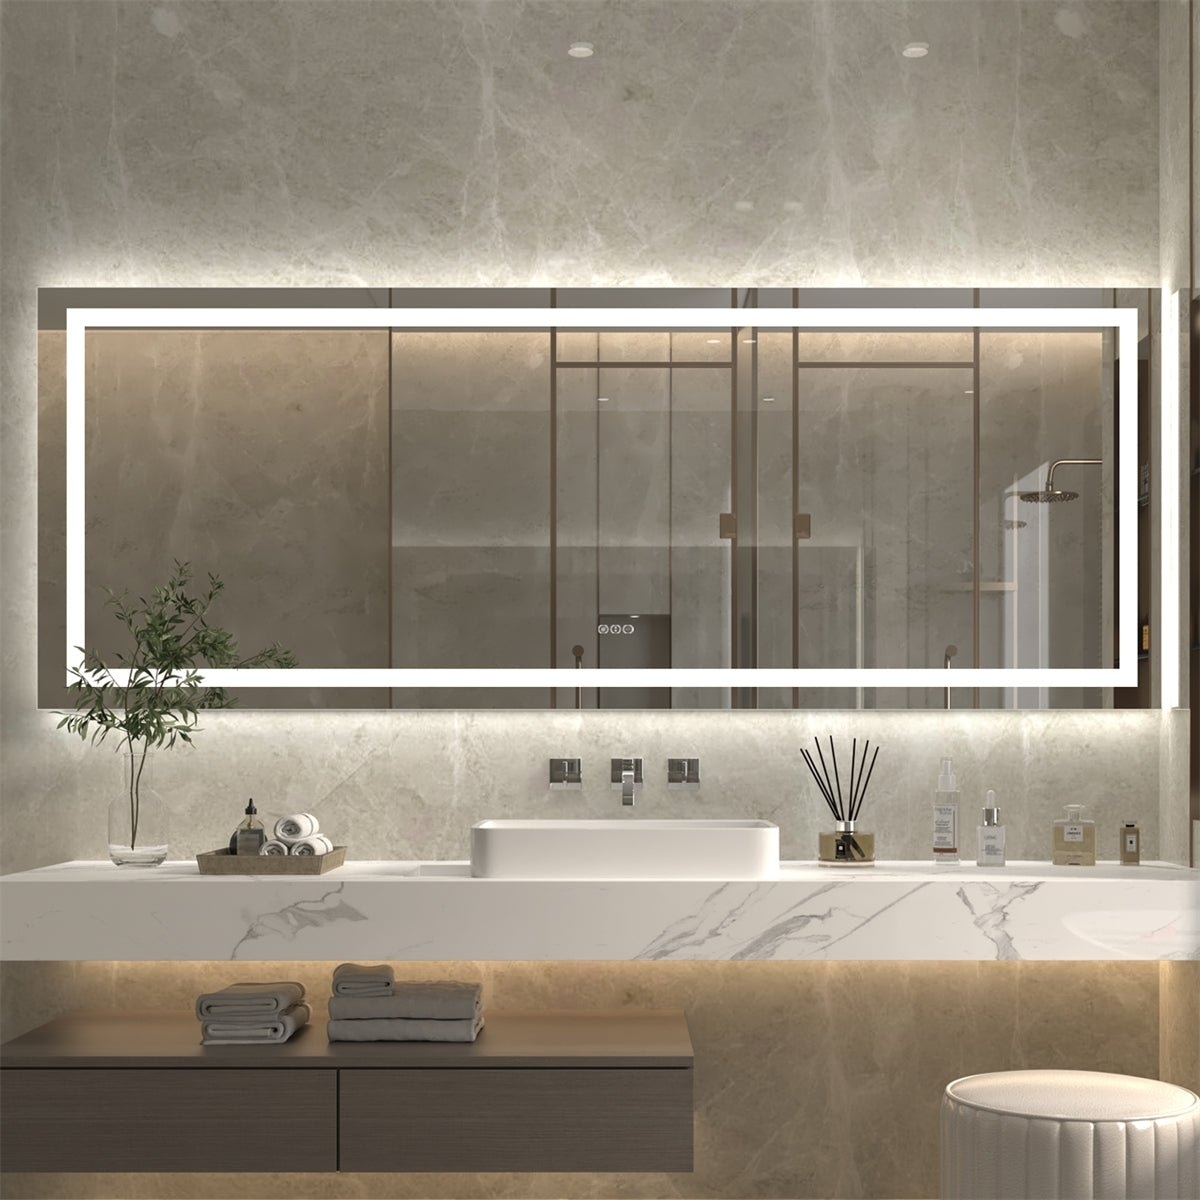 ExBrite 96" W x 36" H LED Bathroom Large Light Led Mirror,Anti Fog,Dimmable,Dual Lighting Mode,Tempered Glass